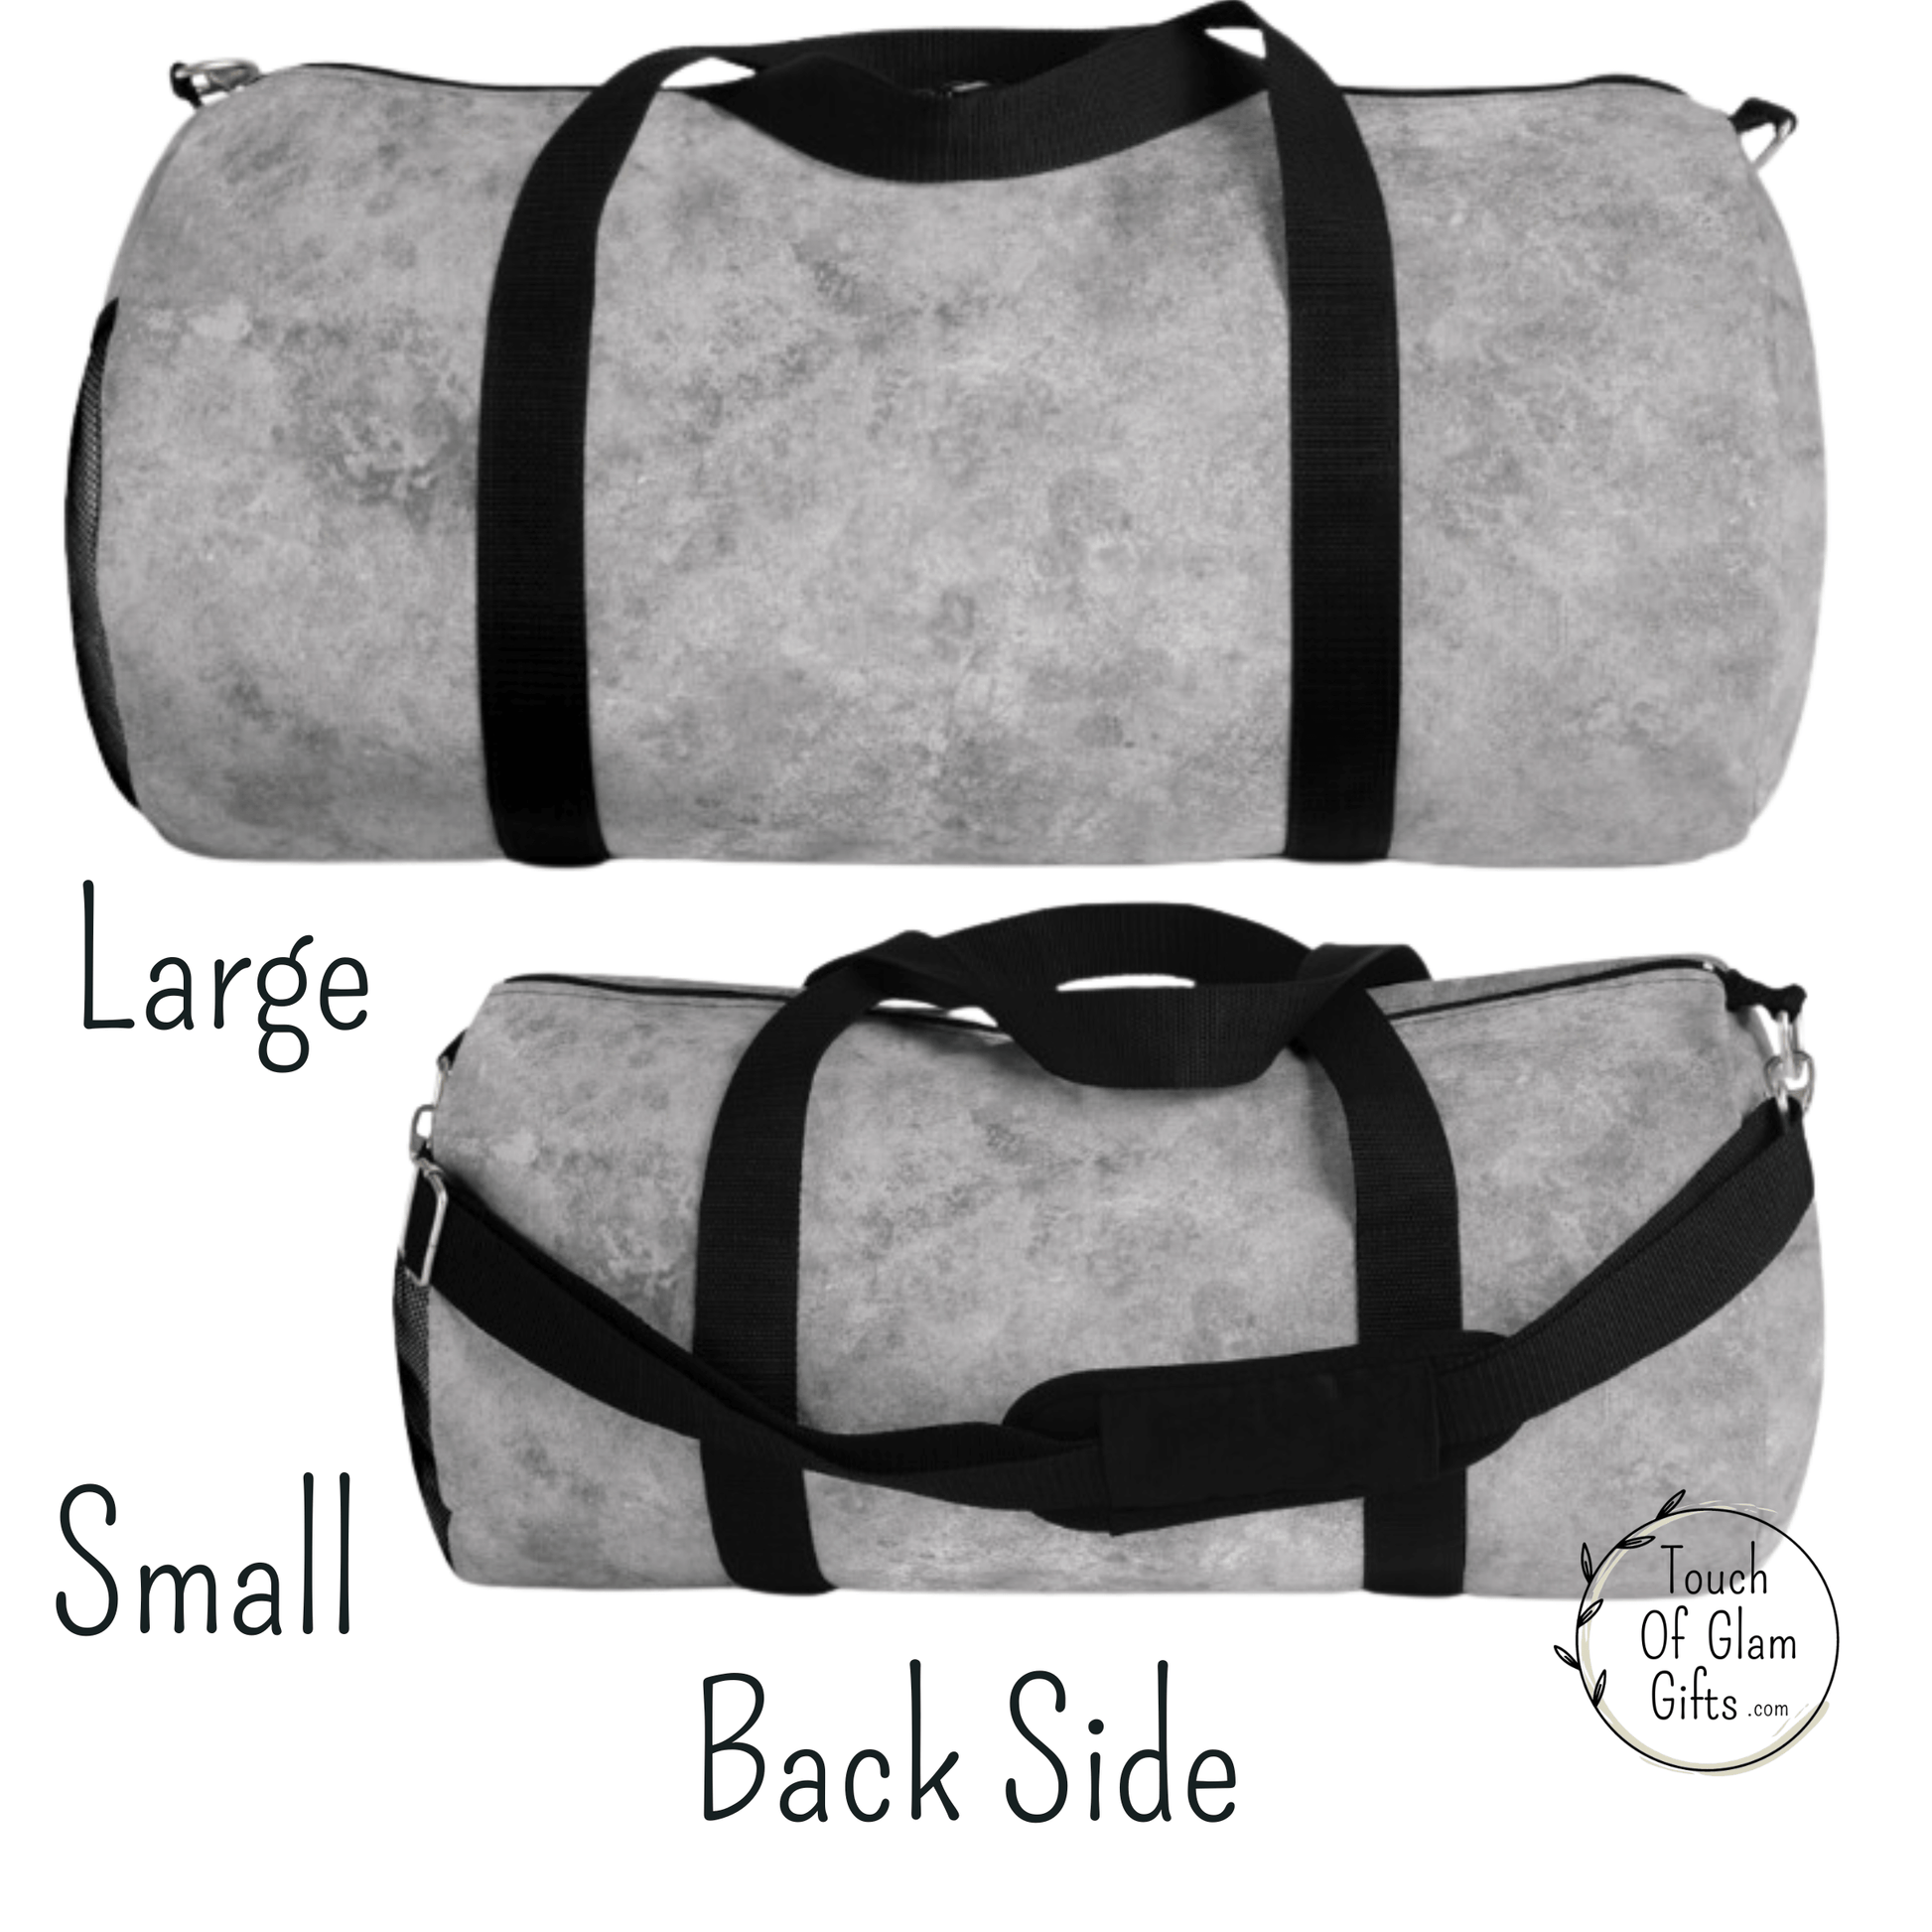 The back side of the duffel bag is the light grey leather print on canvas with black straps.